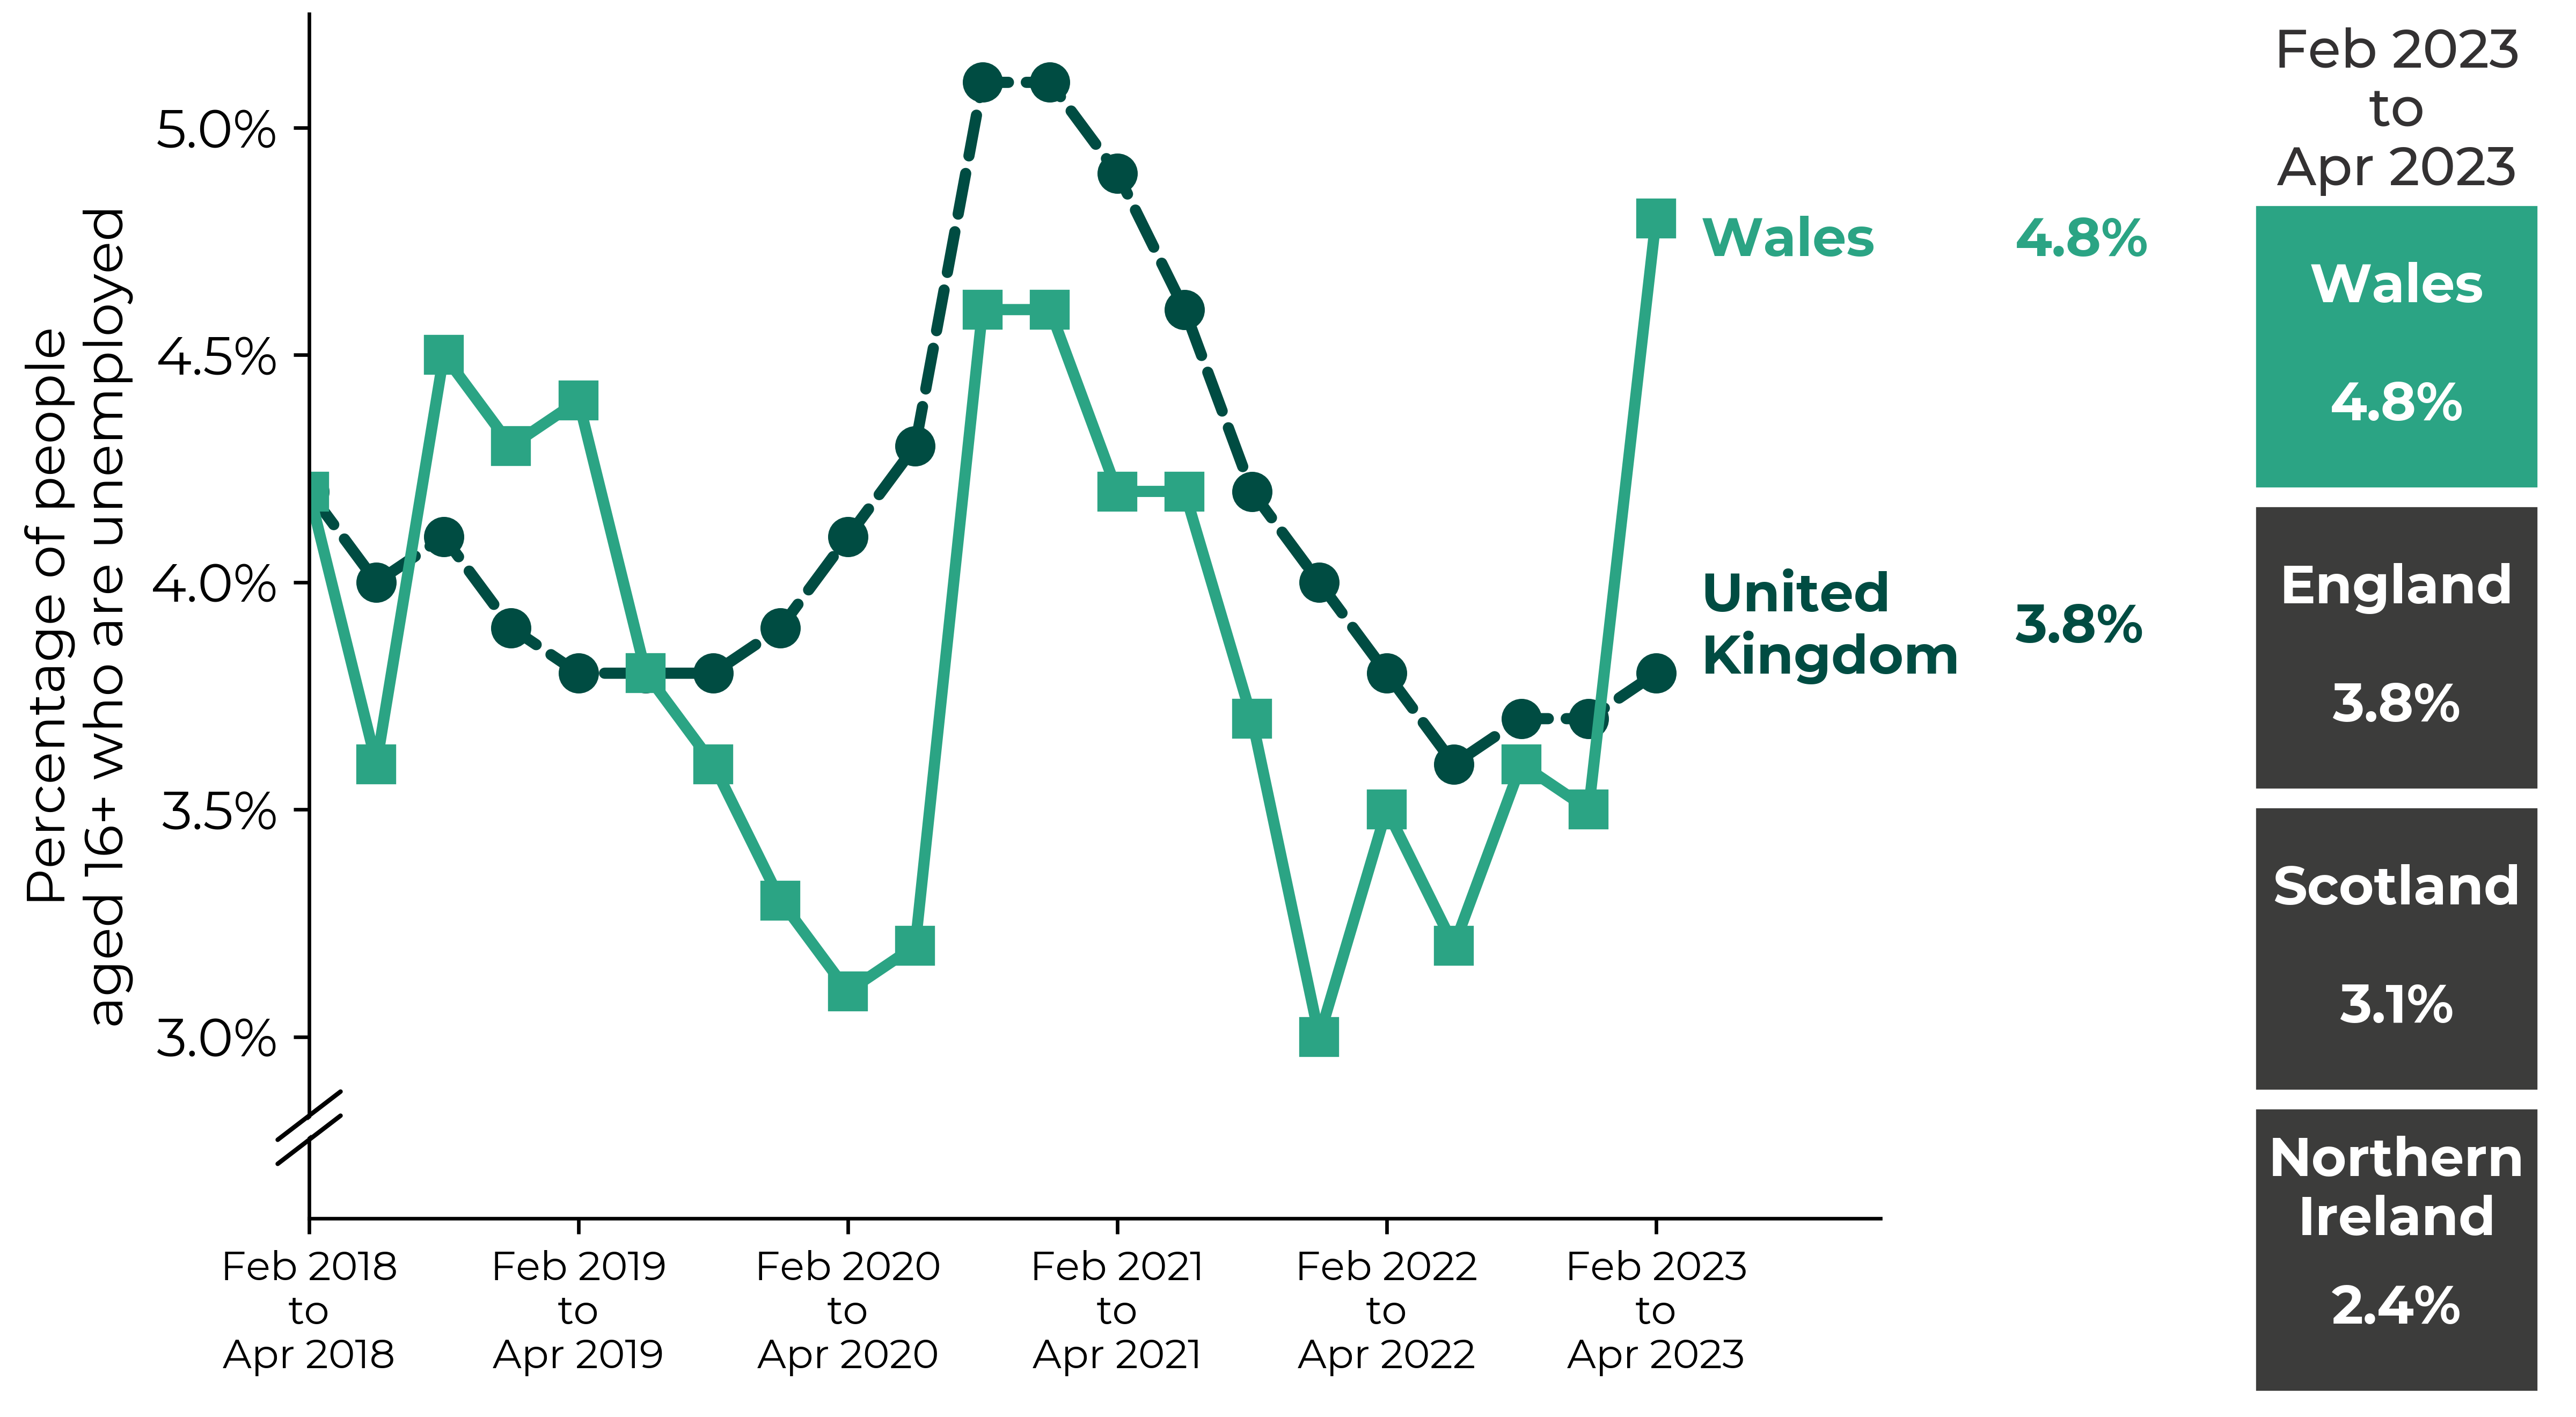 Graph showing an overall decrease in Wales' unemployment rate from over 4% in 2018 to under 3% in early 2020. This was followed by a peak of almost 5% during 2021 and returning to around 3% by 2022. UK unemployment rate followed a similar pattern. Figures for the latest period (February 2023 to April 2023) are Northern Ireland 2.4%, Scotland 3.1%, England 3.8%, Wales 4.8% and UK 3.8%.